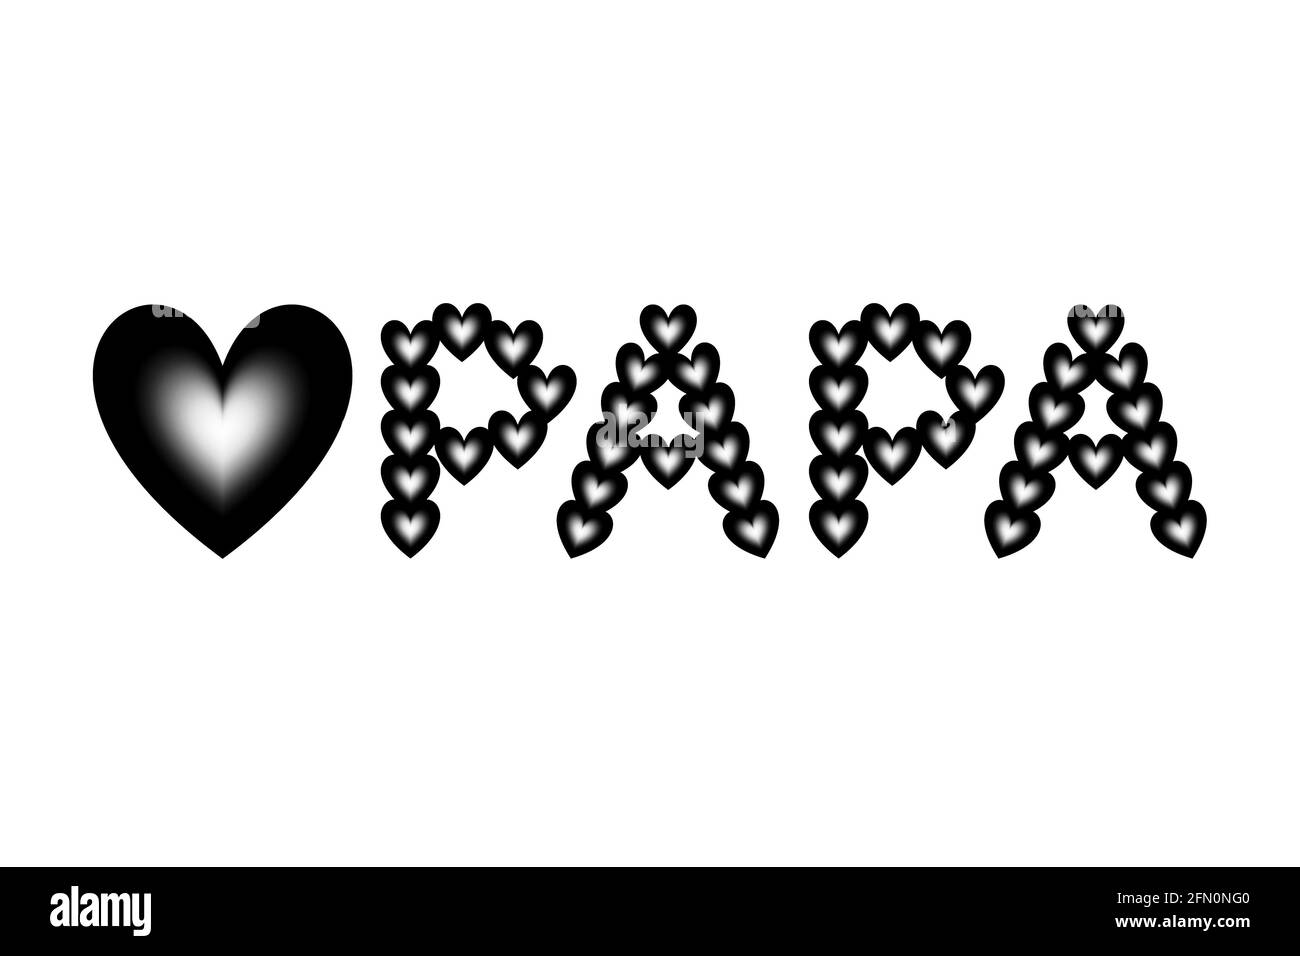 Gradient of black and white heart shapes are arranged into the love symbol and word 'PAPA'. Stock Photo